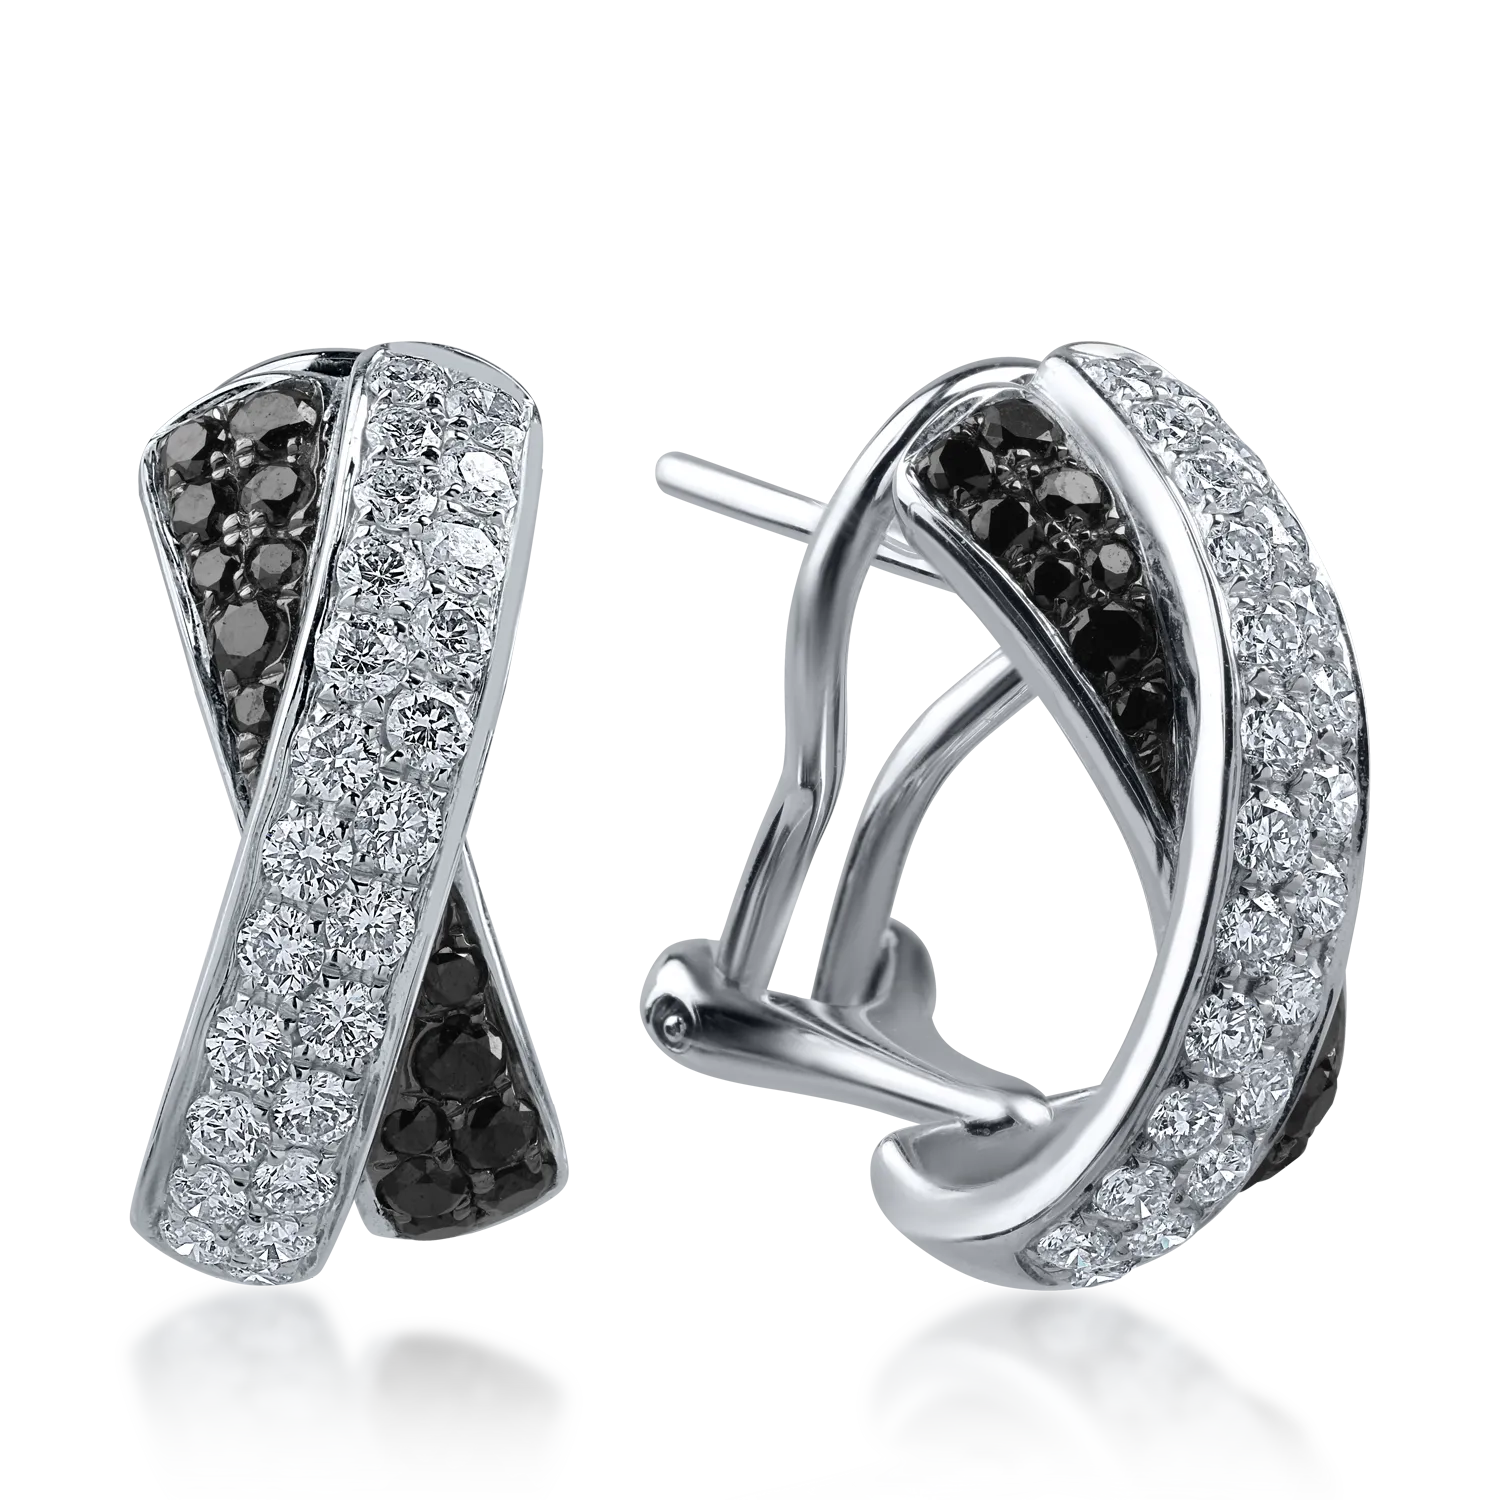 White gold earrings with 0.78ct clear diamonds and 0.41ct black diamonds